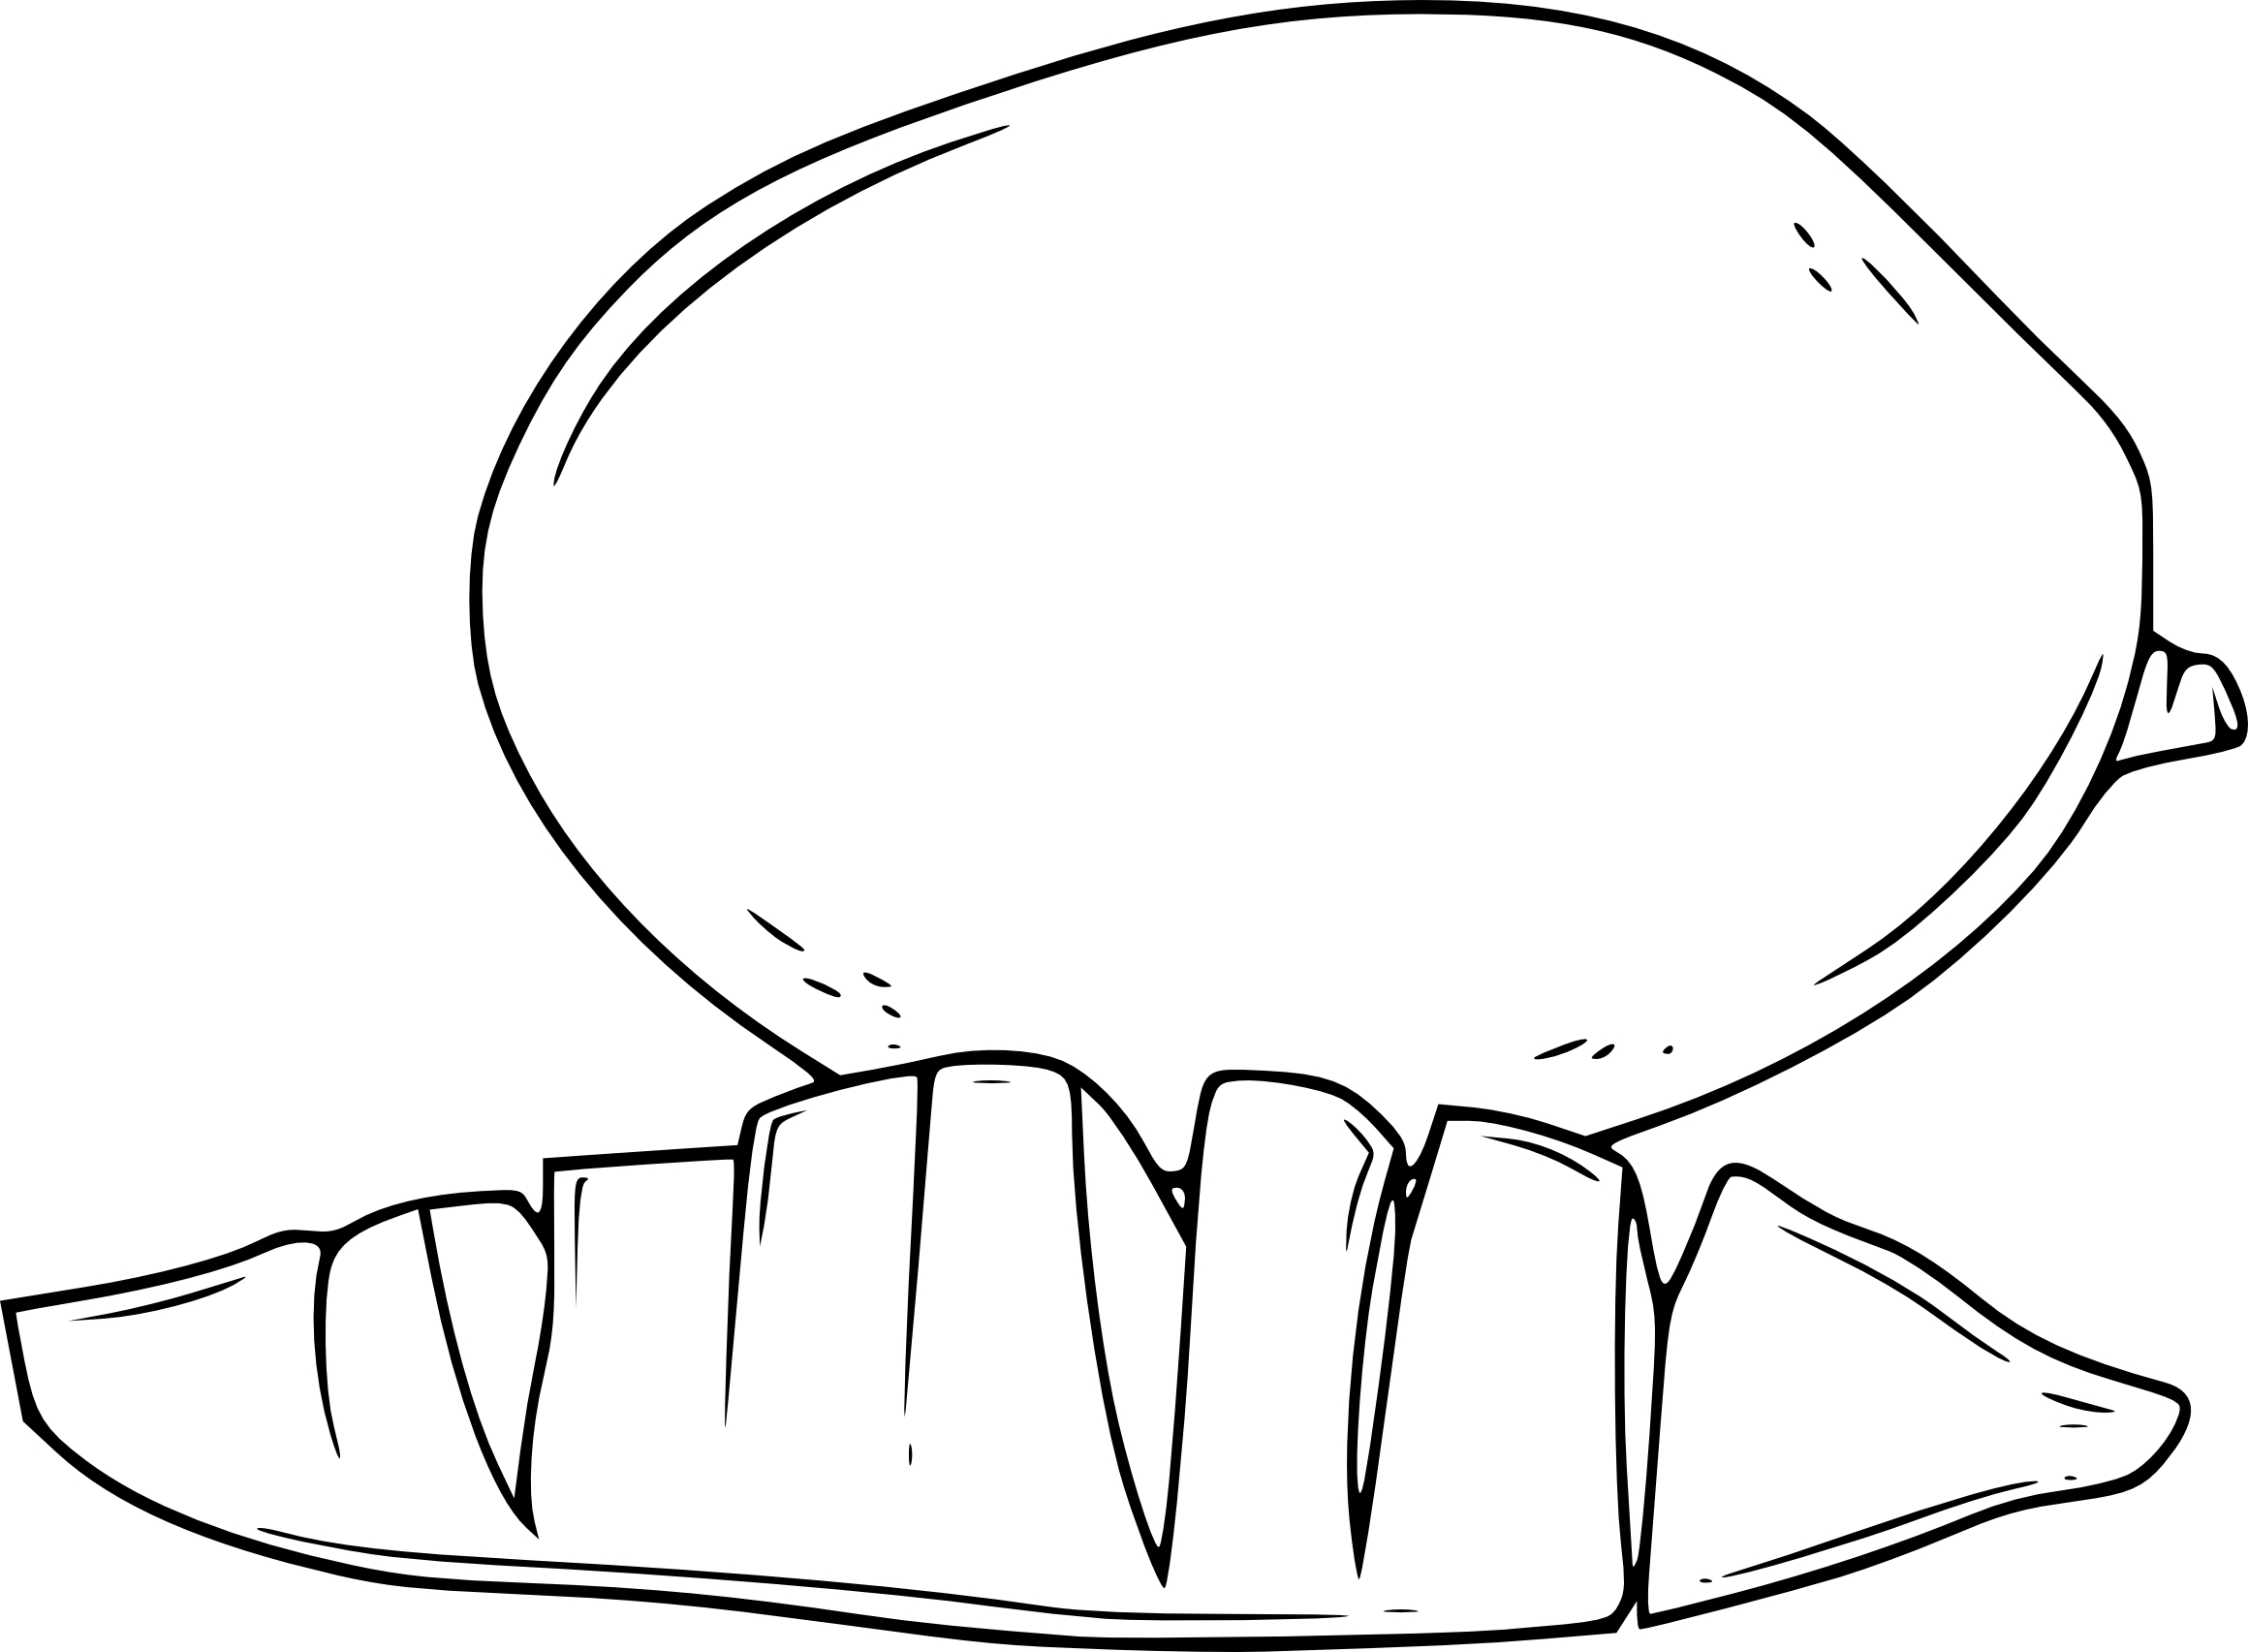 Mango drawing and coloring page